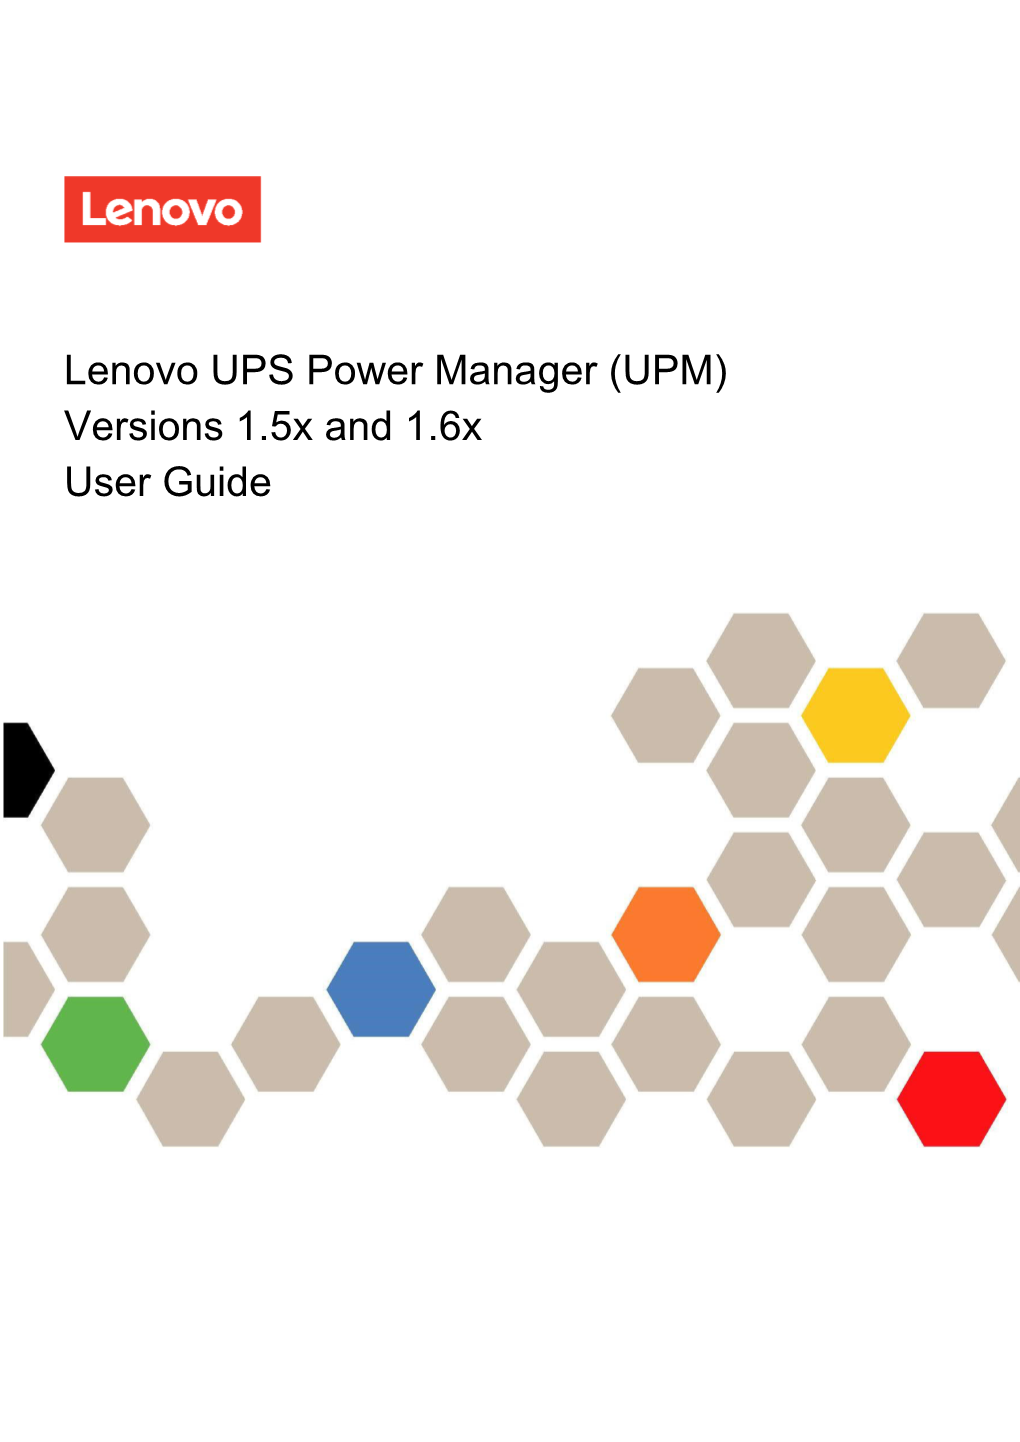 Lenovo UPS Power Manager (UPM) Versions 1.5X and 1.6X User Guide Note